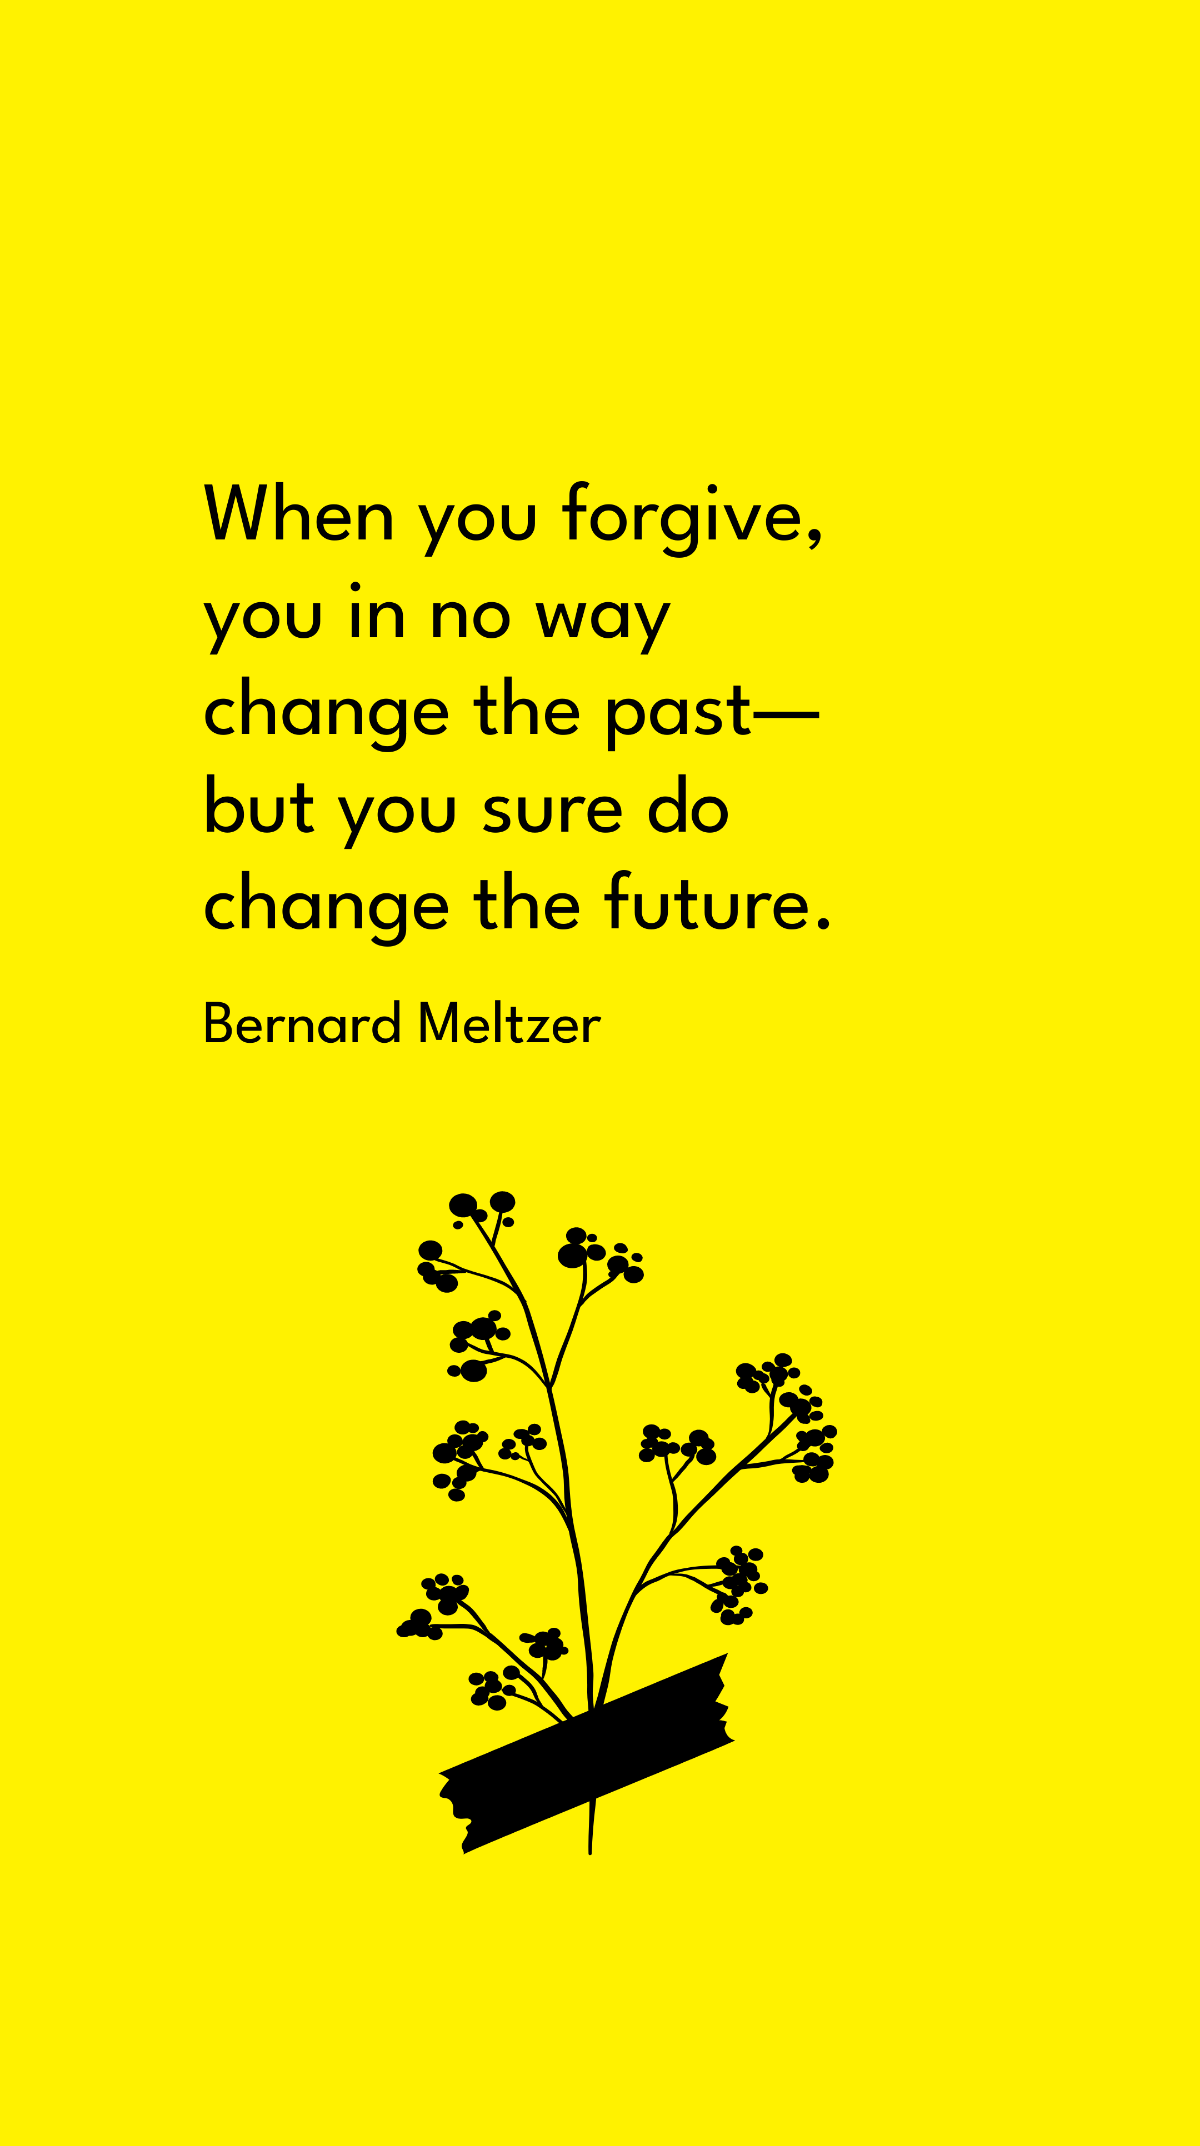 Free Bernard Meltzer - When you forgive, you in no way change the past - but you sure do change the future. Template